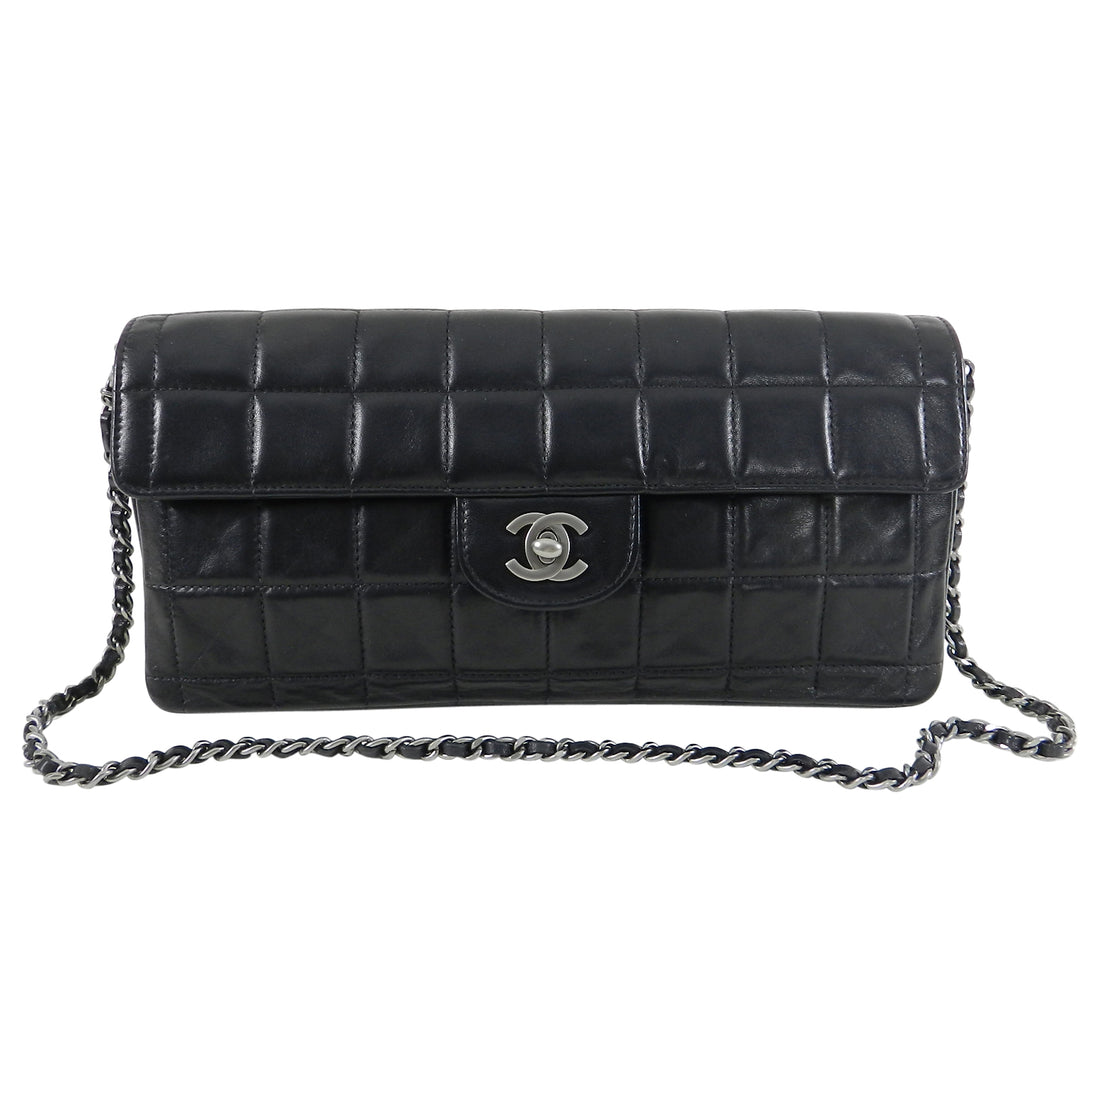 East west chocolate bar leather handbag Chanel Black in Leather - 38255487